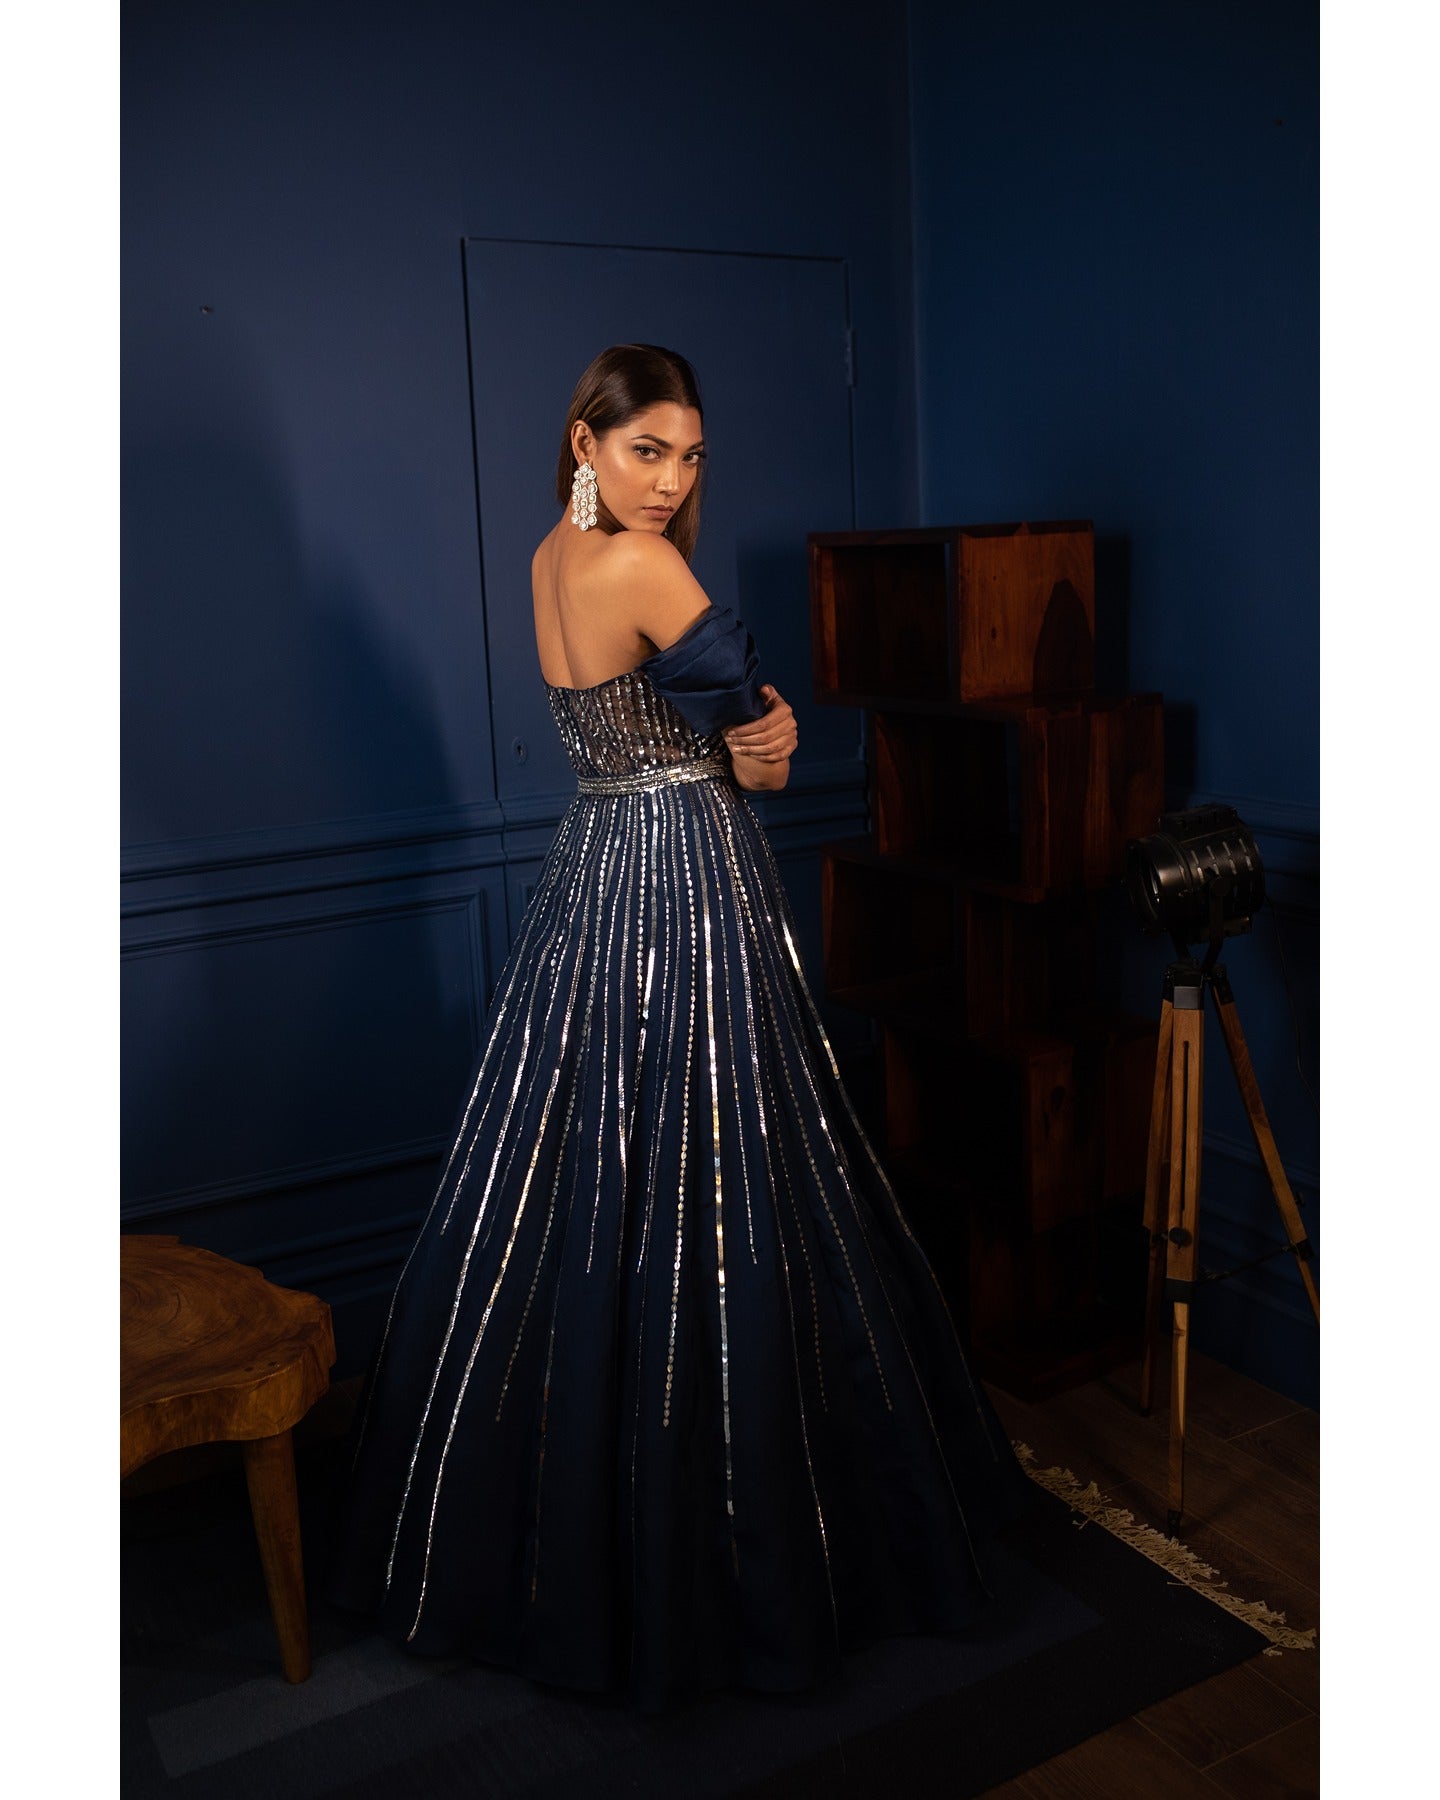 Draped in the enchanting depths of midnight blue, this gown is a celestial masterpiece.